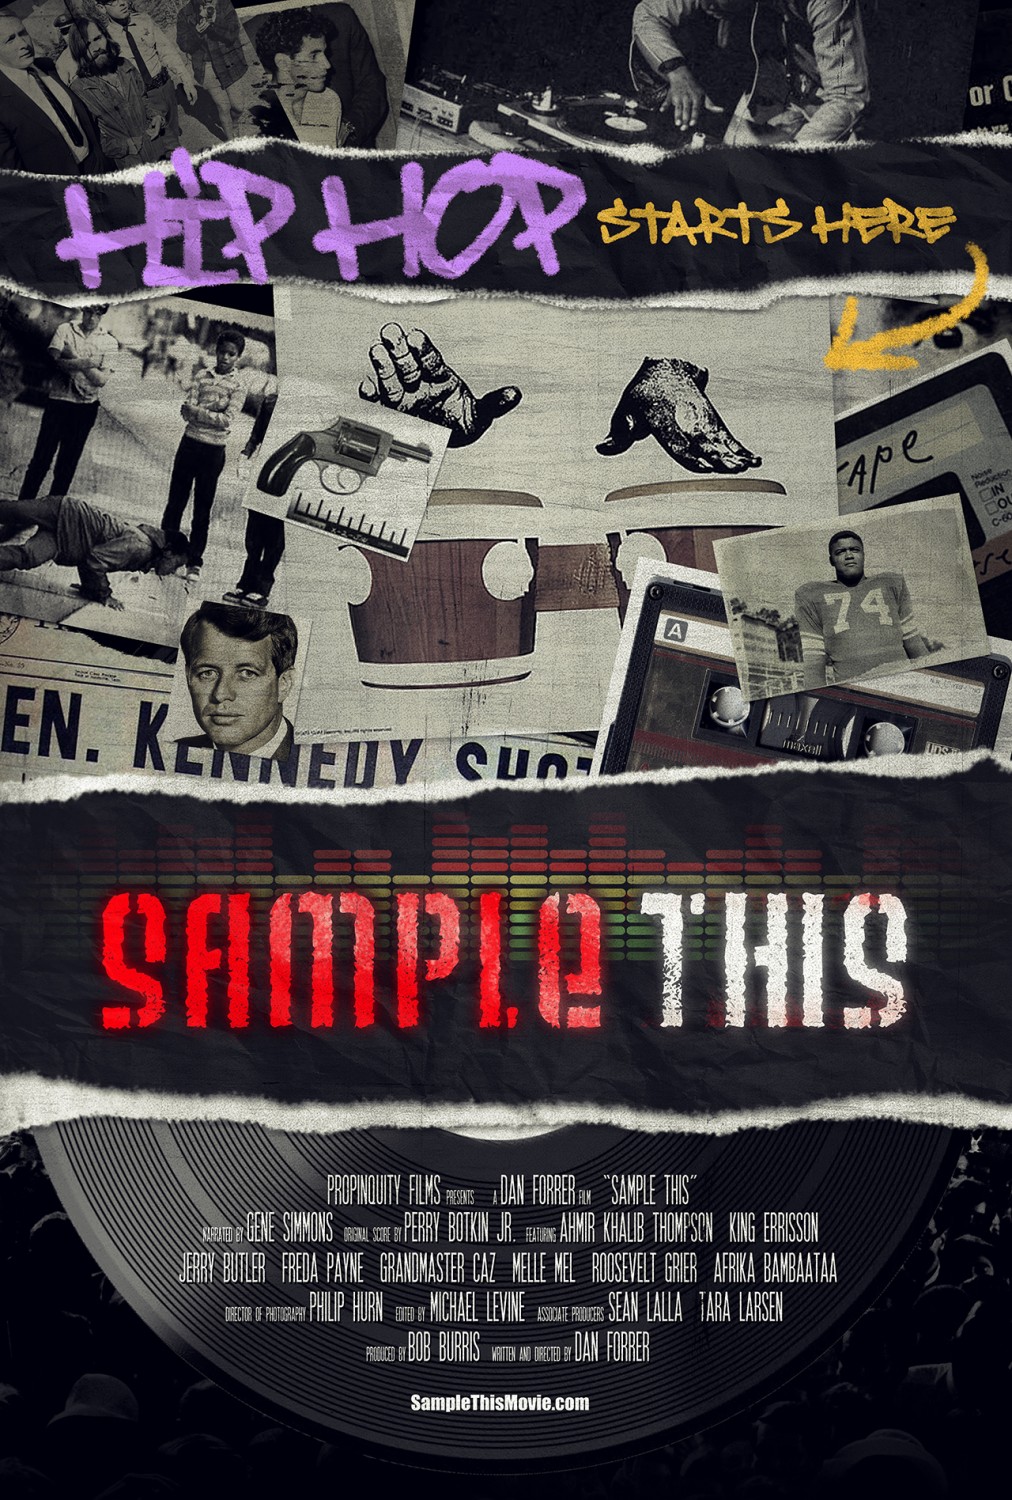 Extra Large Movie Poster Image for Sample This (#1 of 2)